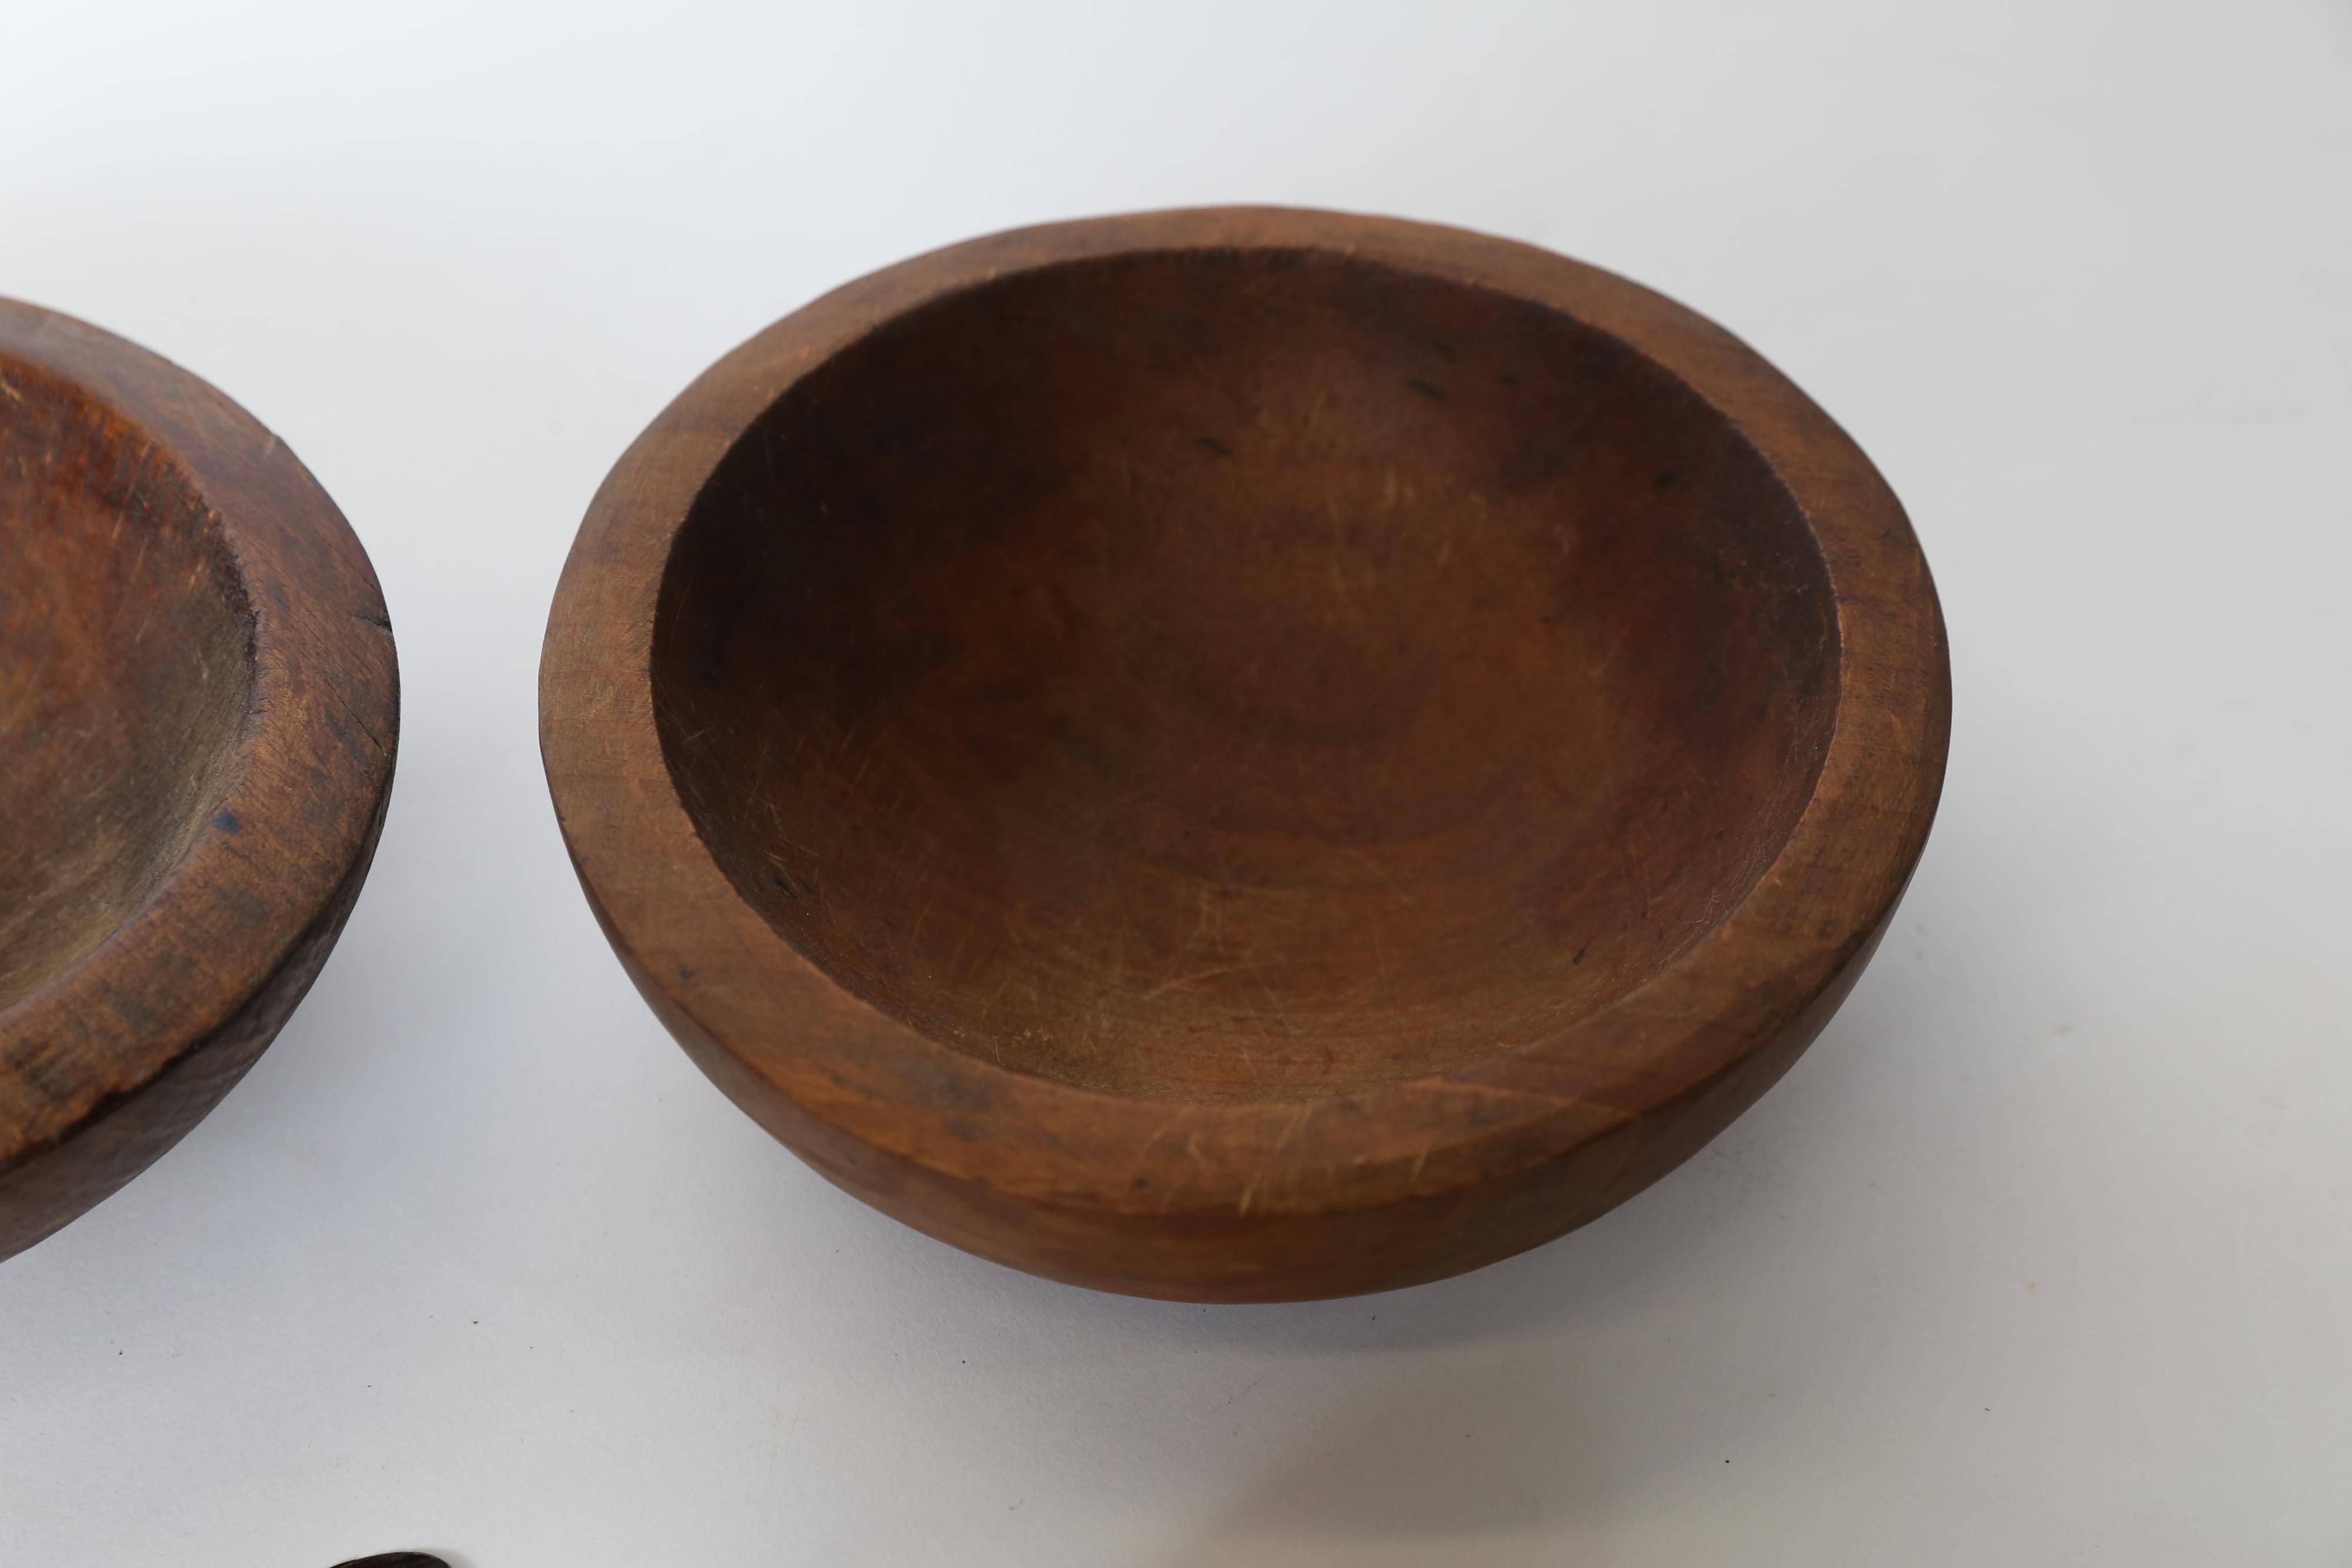 Turned French Herb Cutter and Olivewood Bowl